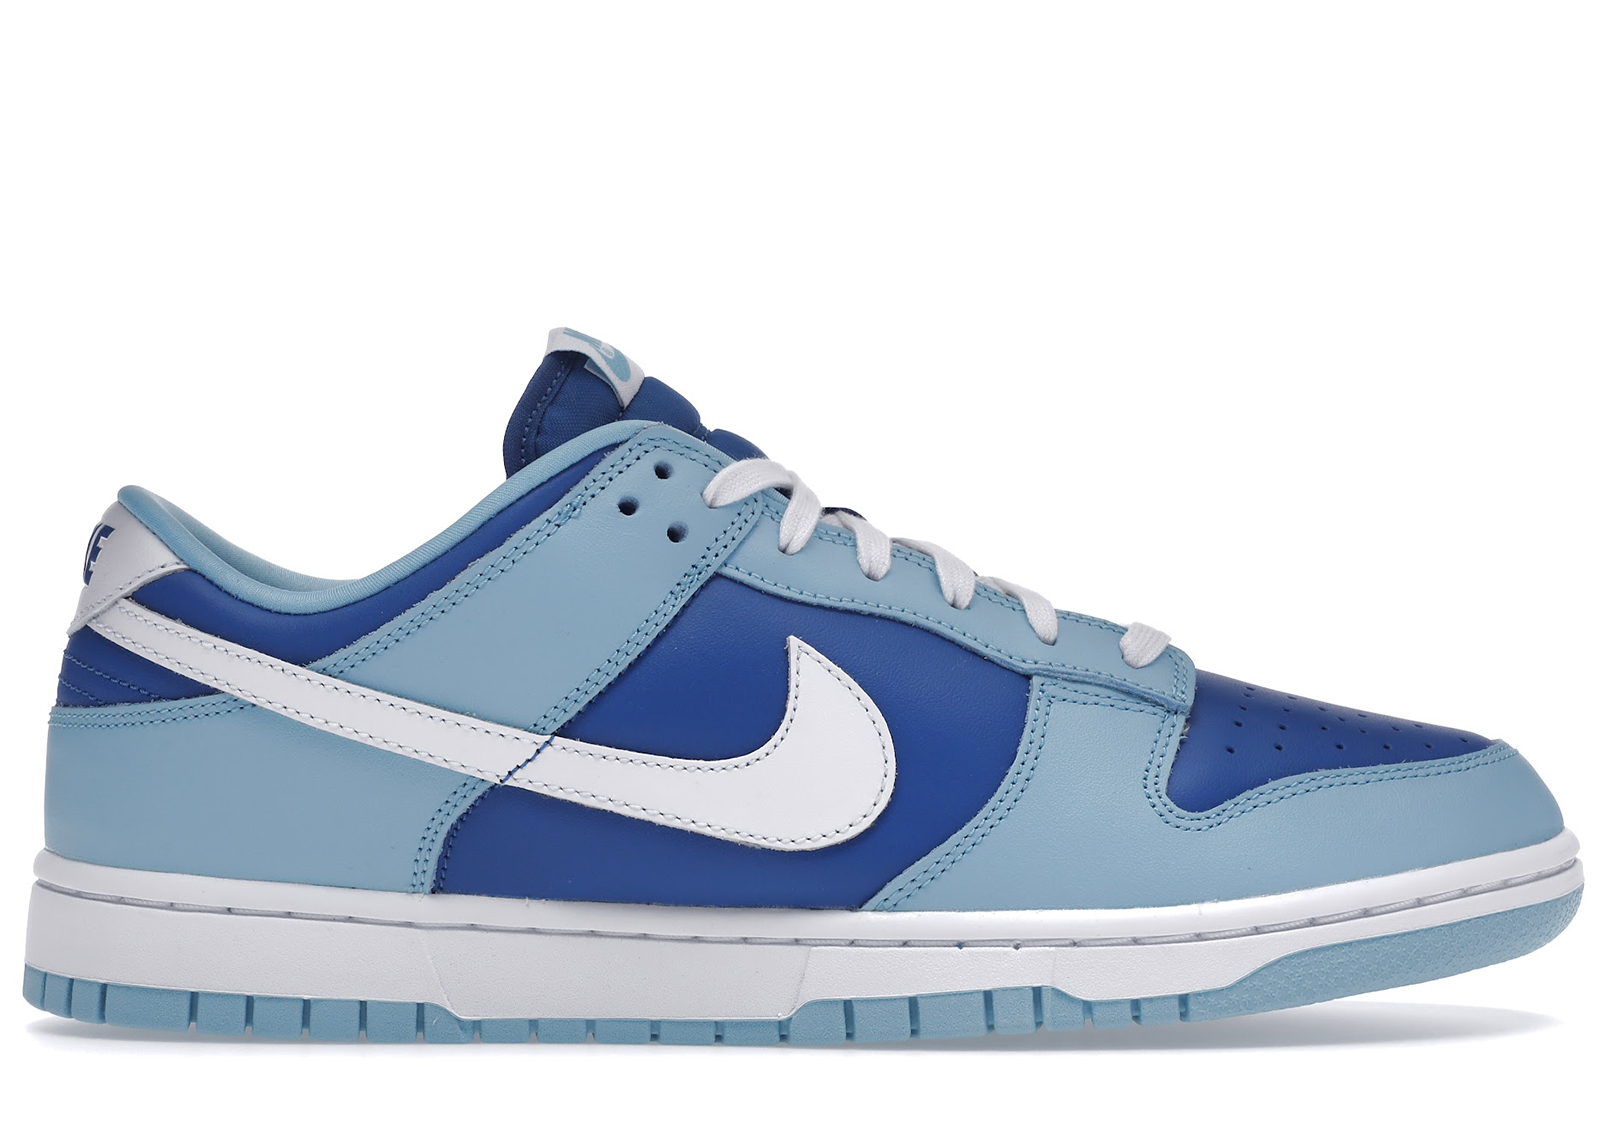 Buy Nike Dunk Size 10 Shoes & New Sneakers - StockX